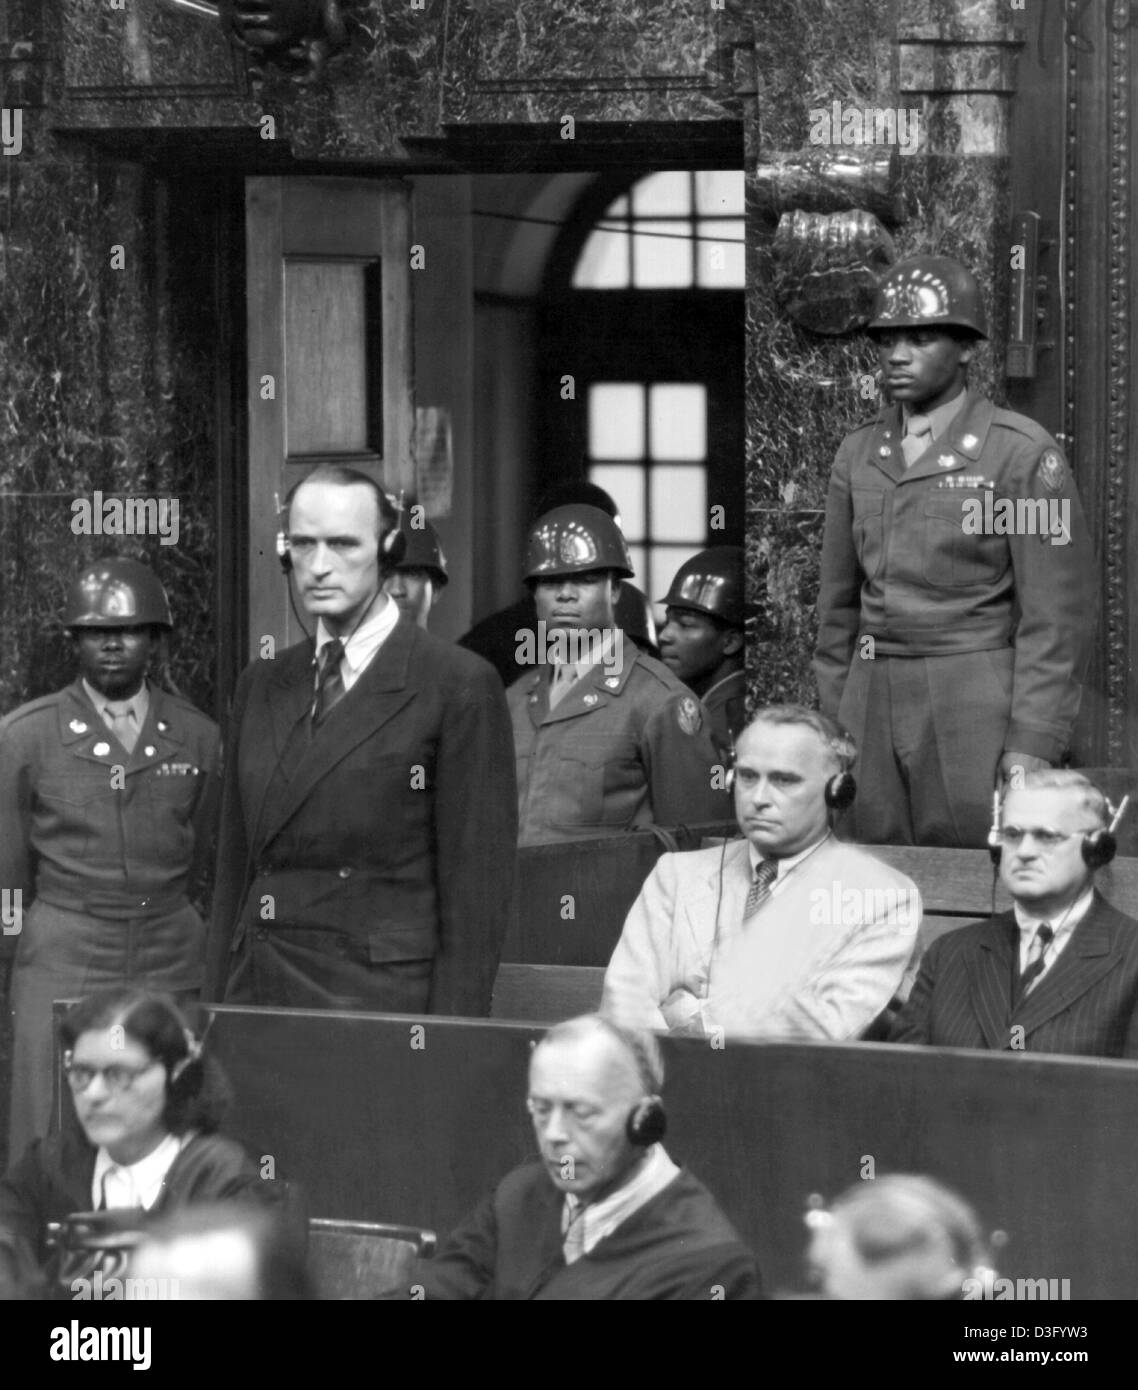 (dpa files) - The industrial magnate Alfried Krupp von Bohlen und Halbach, former sole owner of the Krupp company since 1943, listens to the proclamation of his sentence at the Nuremberg Trials at the court in Nuremberg, Germany, 13 July 1948. He was accused of looting, robbery and slave labour. He was sentenced to 12 years in prison and his wealth and property were confiscated. Af Stock Photo